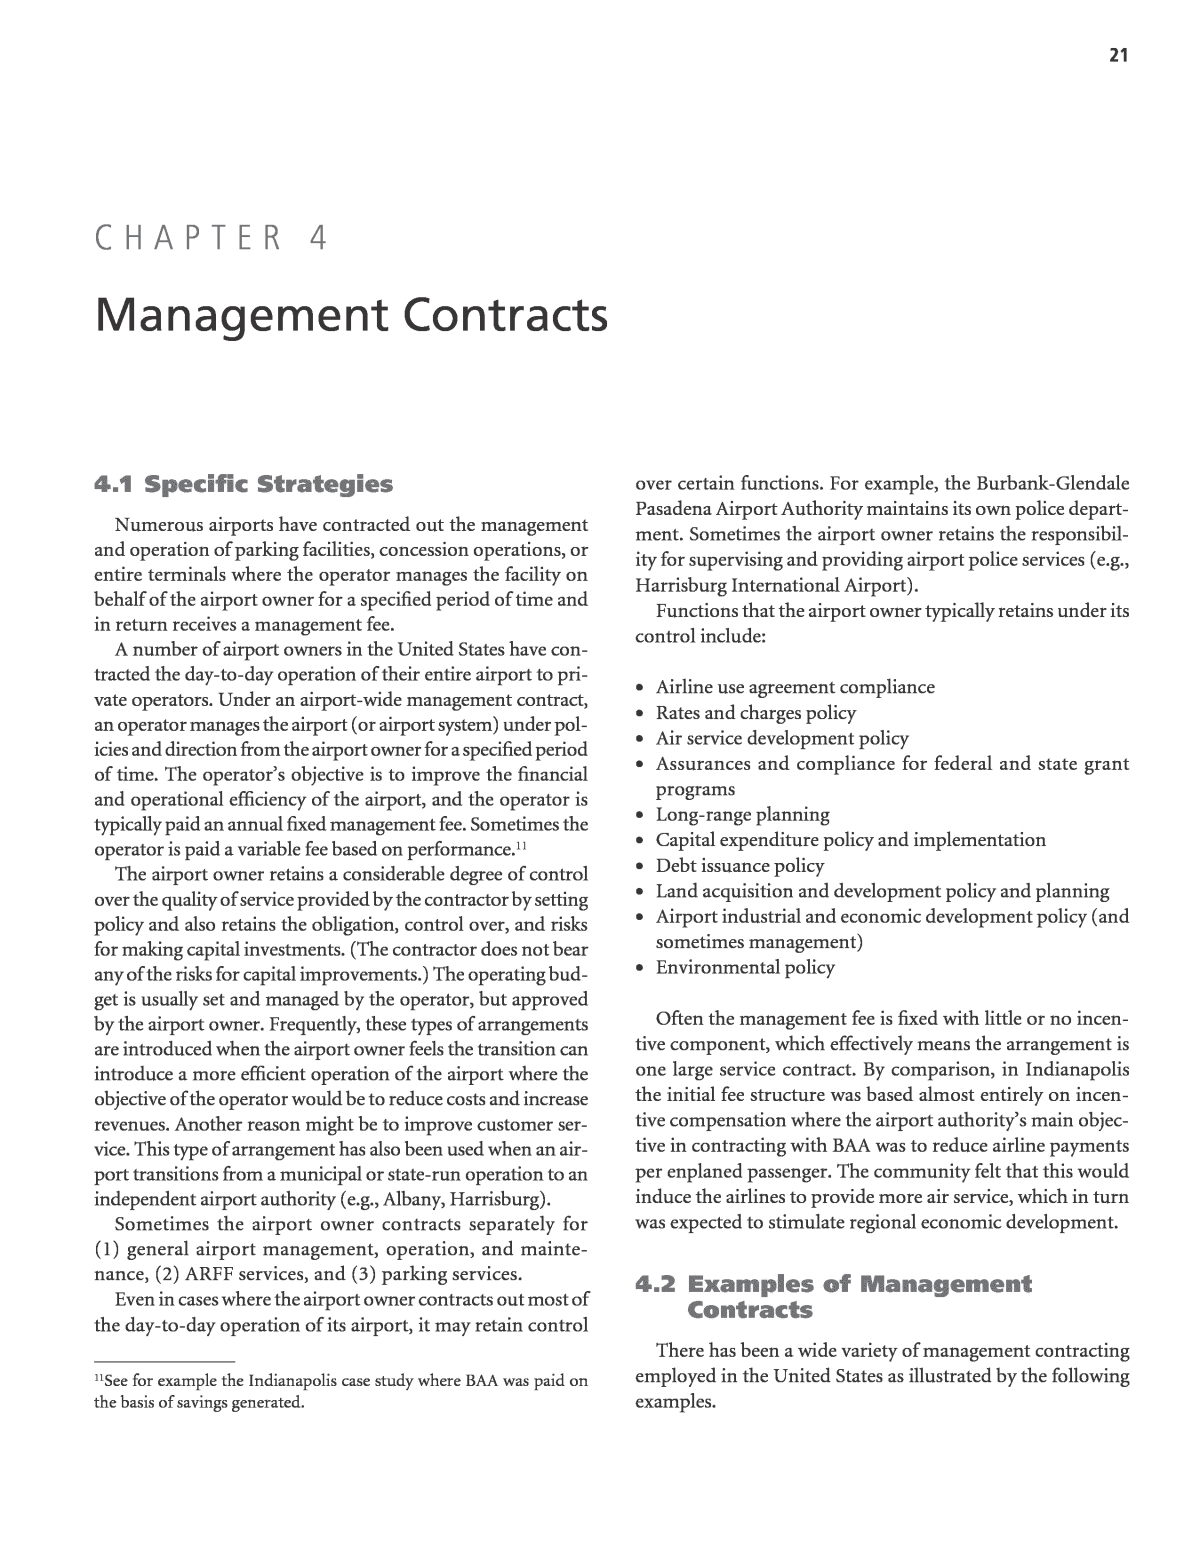 International Agreement On Environmental Management Chapter 4 Management Contracts Considering And Evaluating